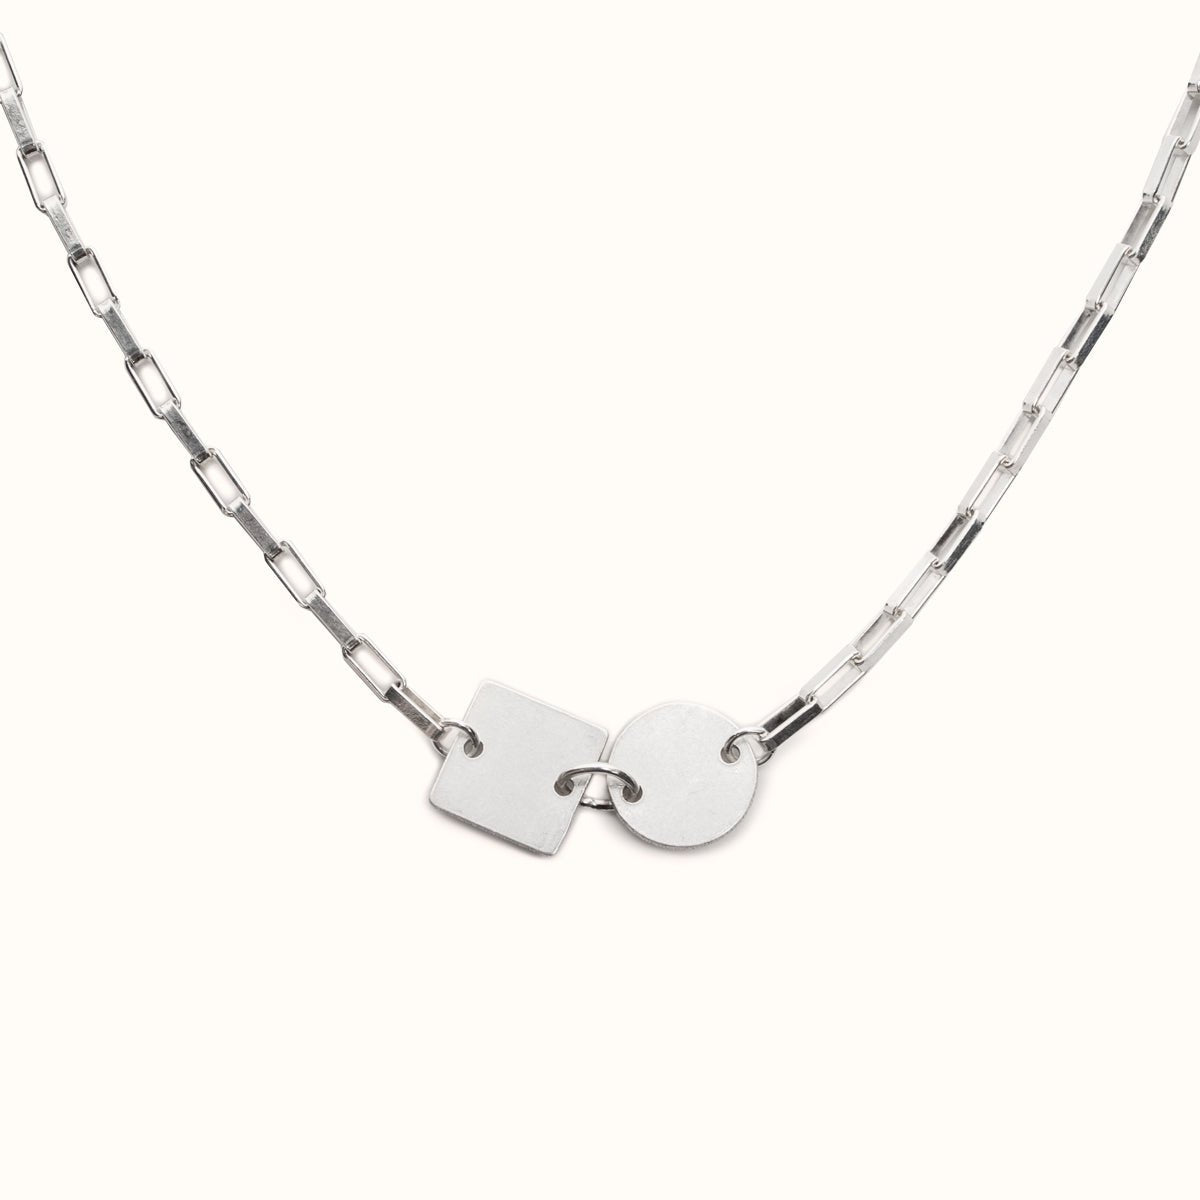 A sterling silver small link chain necklace with a flat square and flat circular focal piece. The Acreca Necklace is designed and handcrafted by Betsy & Iya in Portland, Oregon.